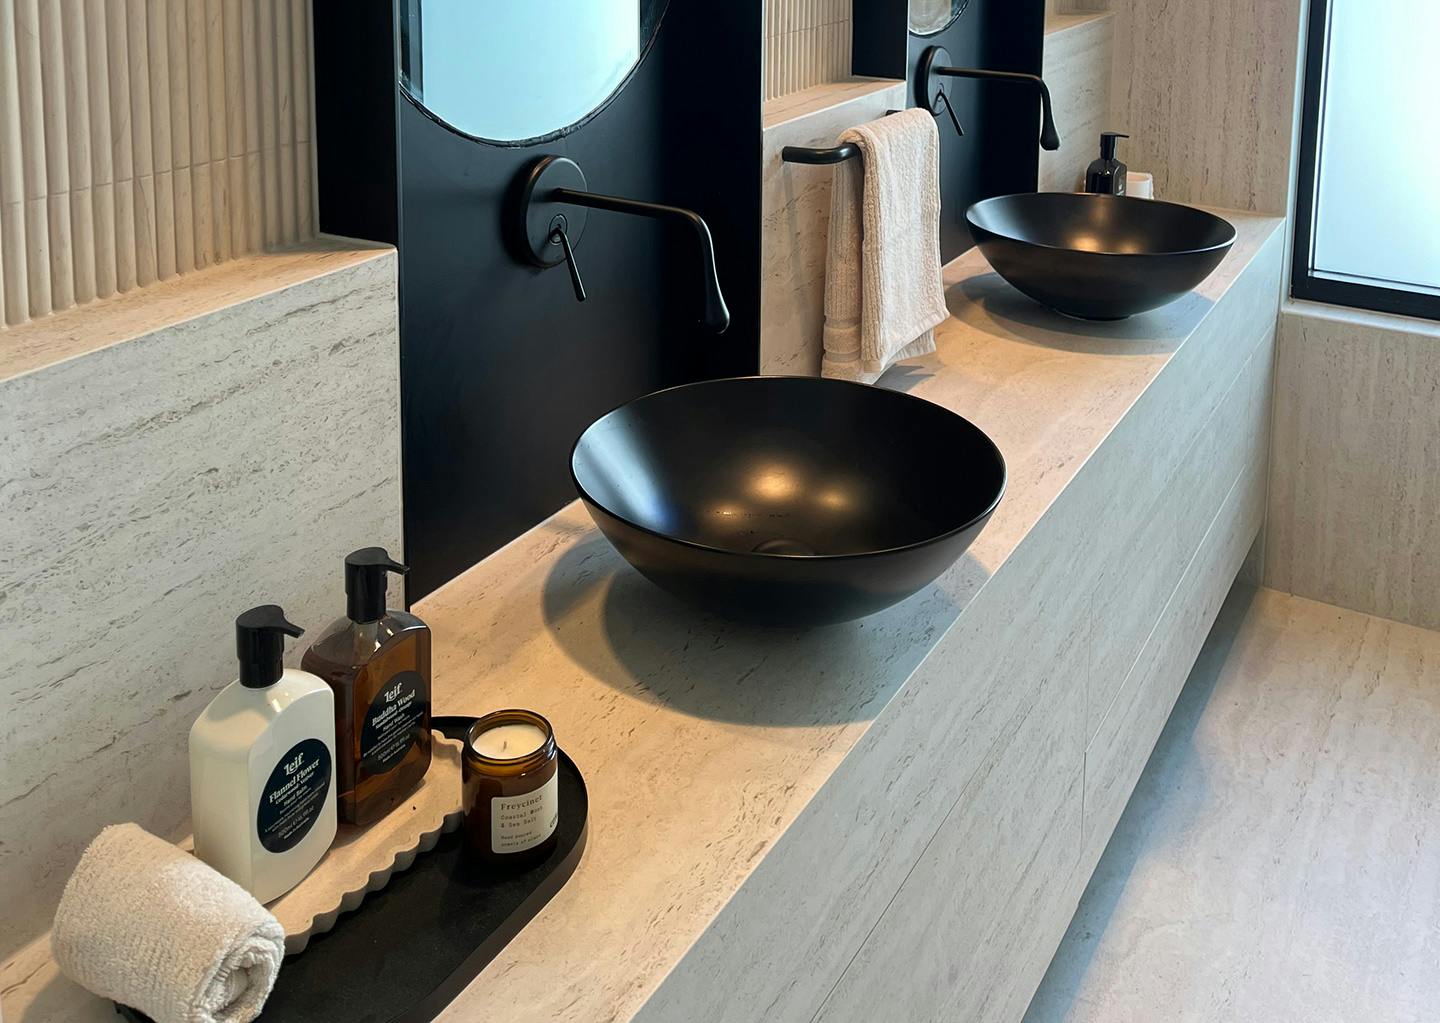 Numéro d'image 43 de la section actuelle de The refurbishment of its bathrooms, carried out entirely with Dekton, brings this Irish hotel closer to achieving one more star de Cosentino France